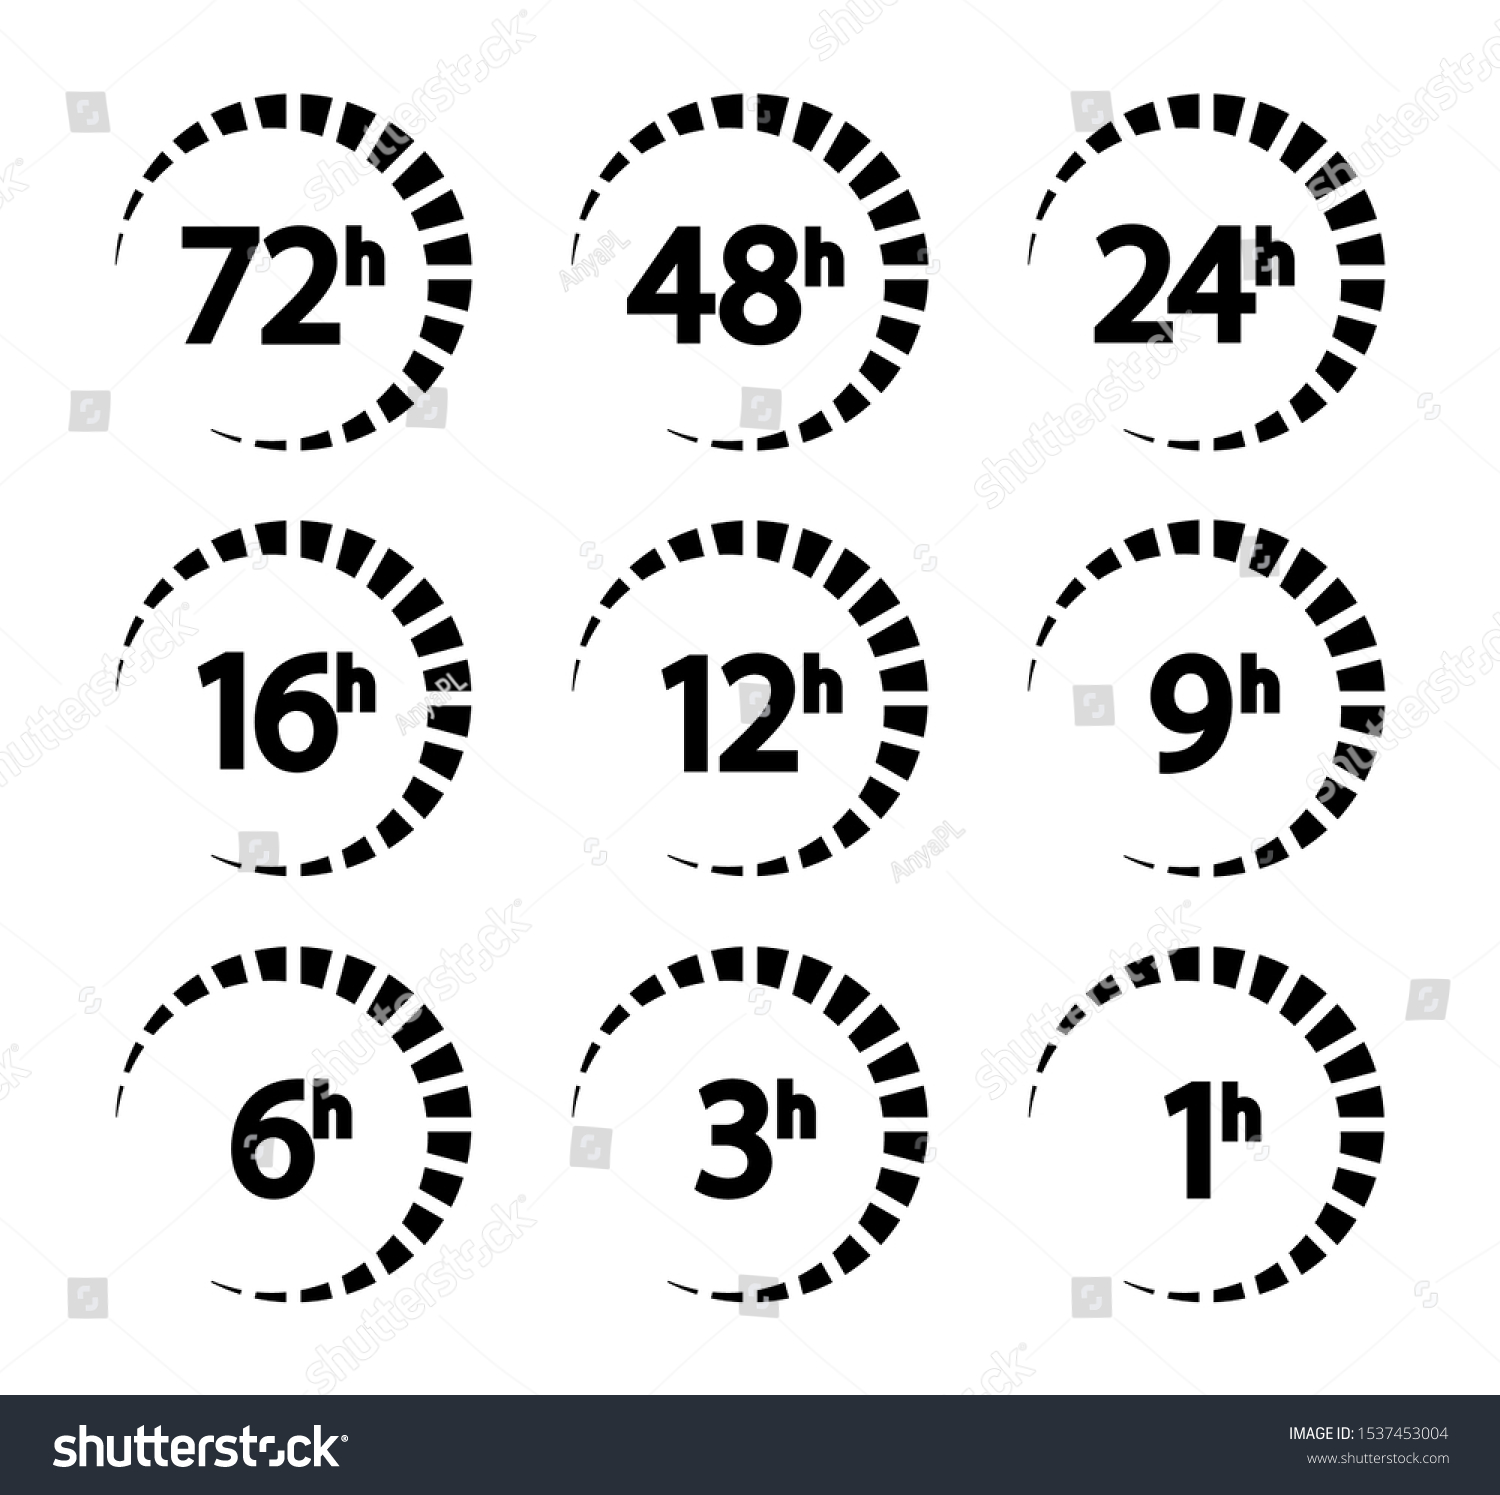 SVG of Set of arrows clock and time icons. 1, 3, 6, 9, 12, 16, 24, 48, 72 hours. svg